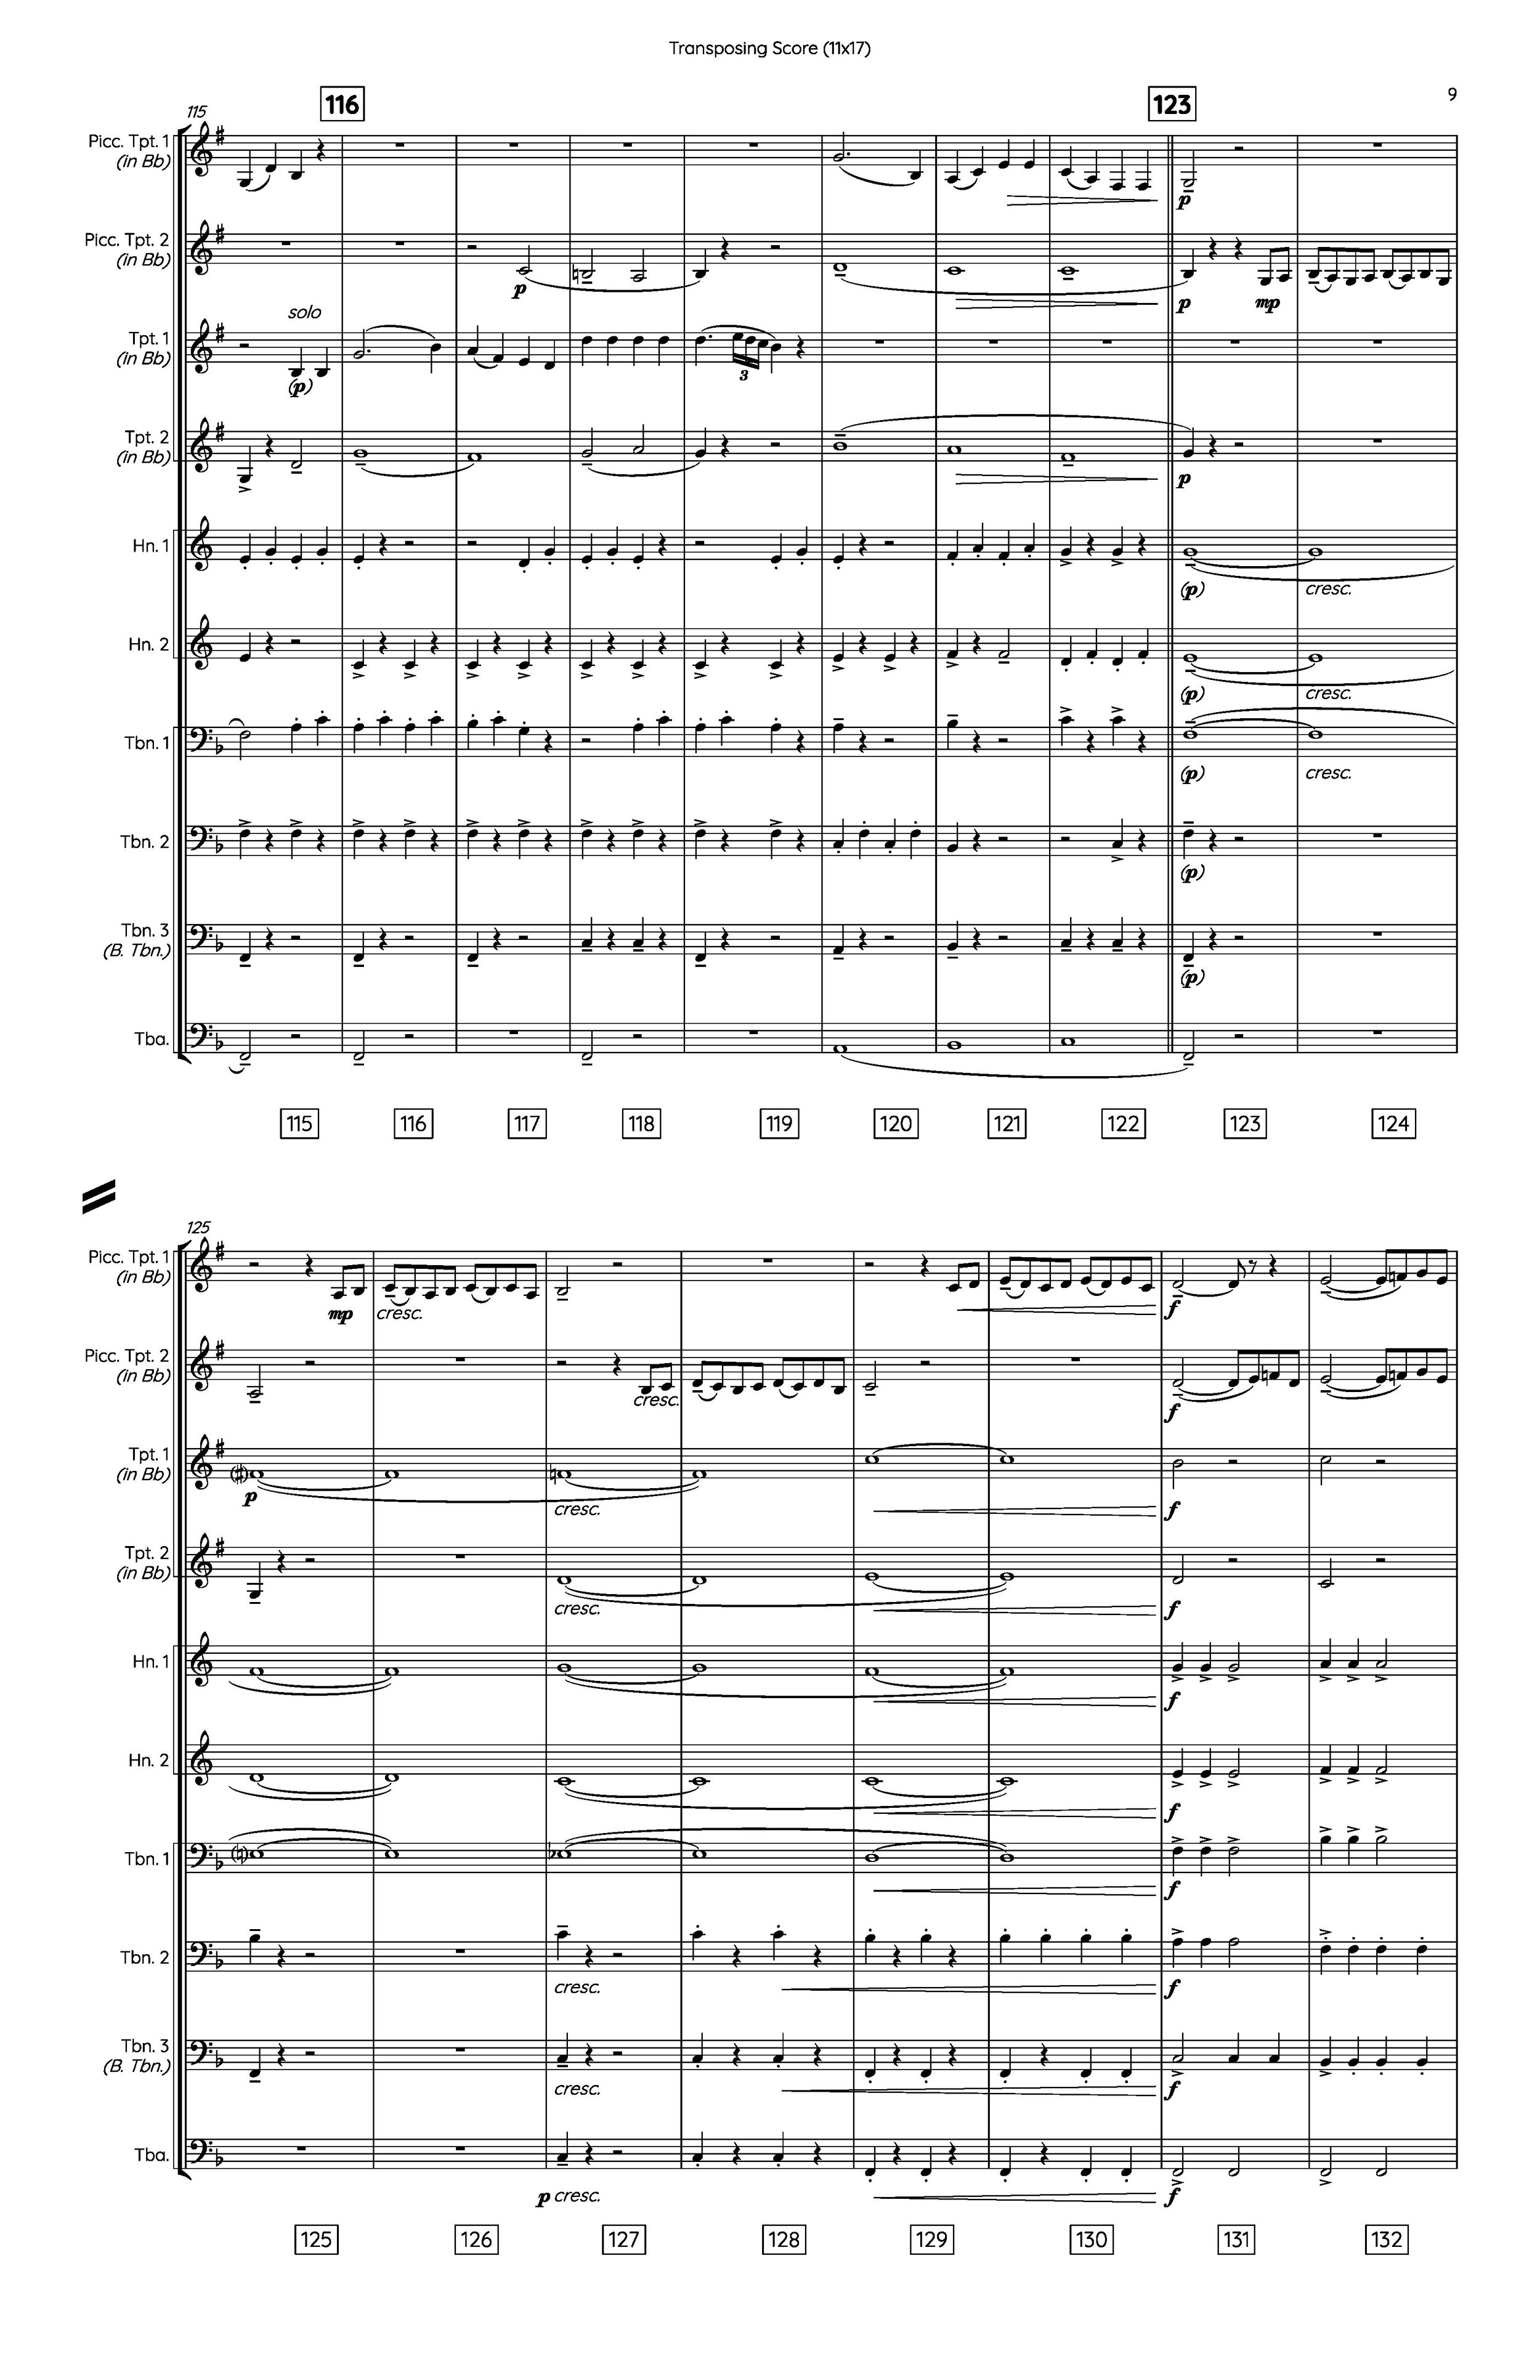 Marriage of Figaro [Brass Ensemble] in Bb - Score 11x17_Page_09.jpg